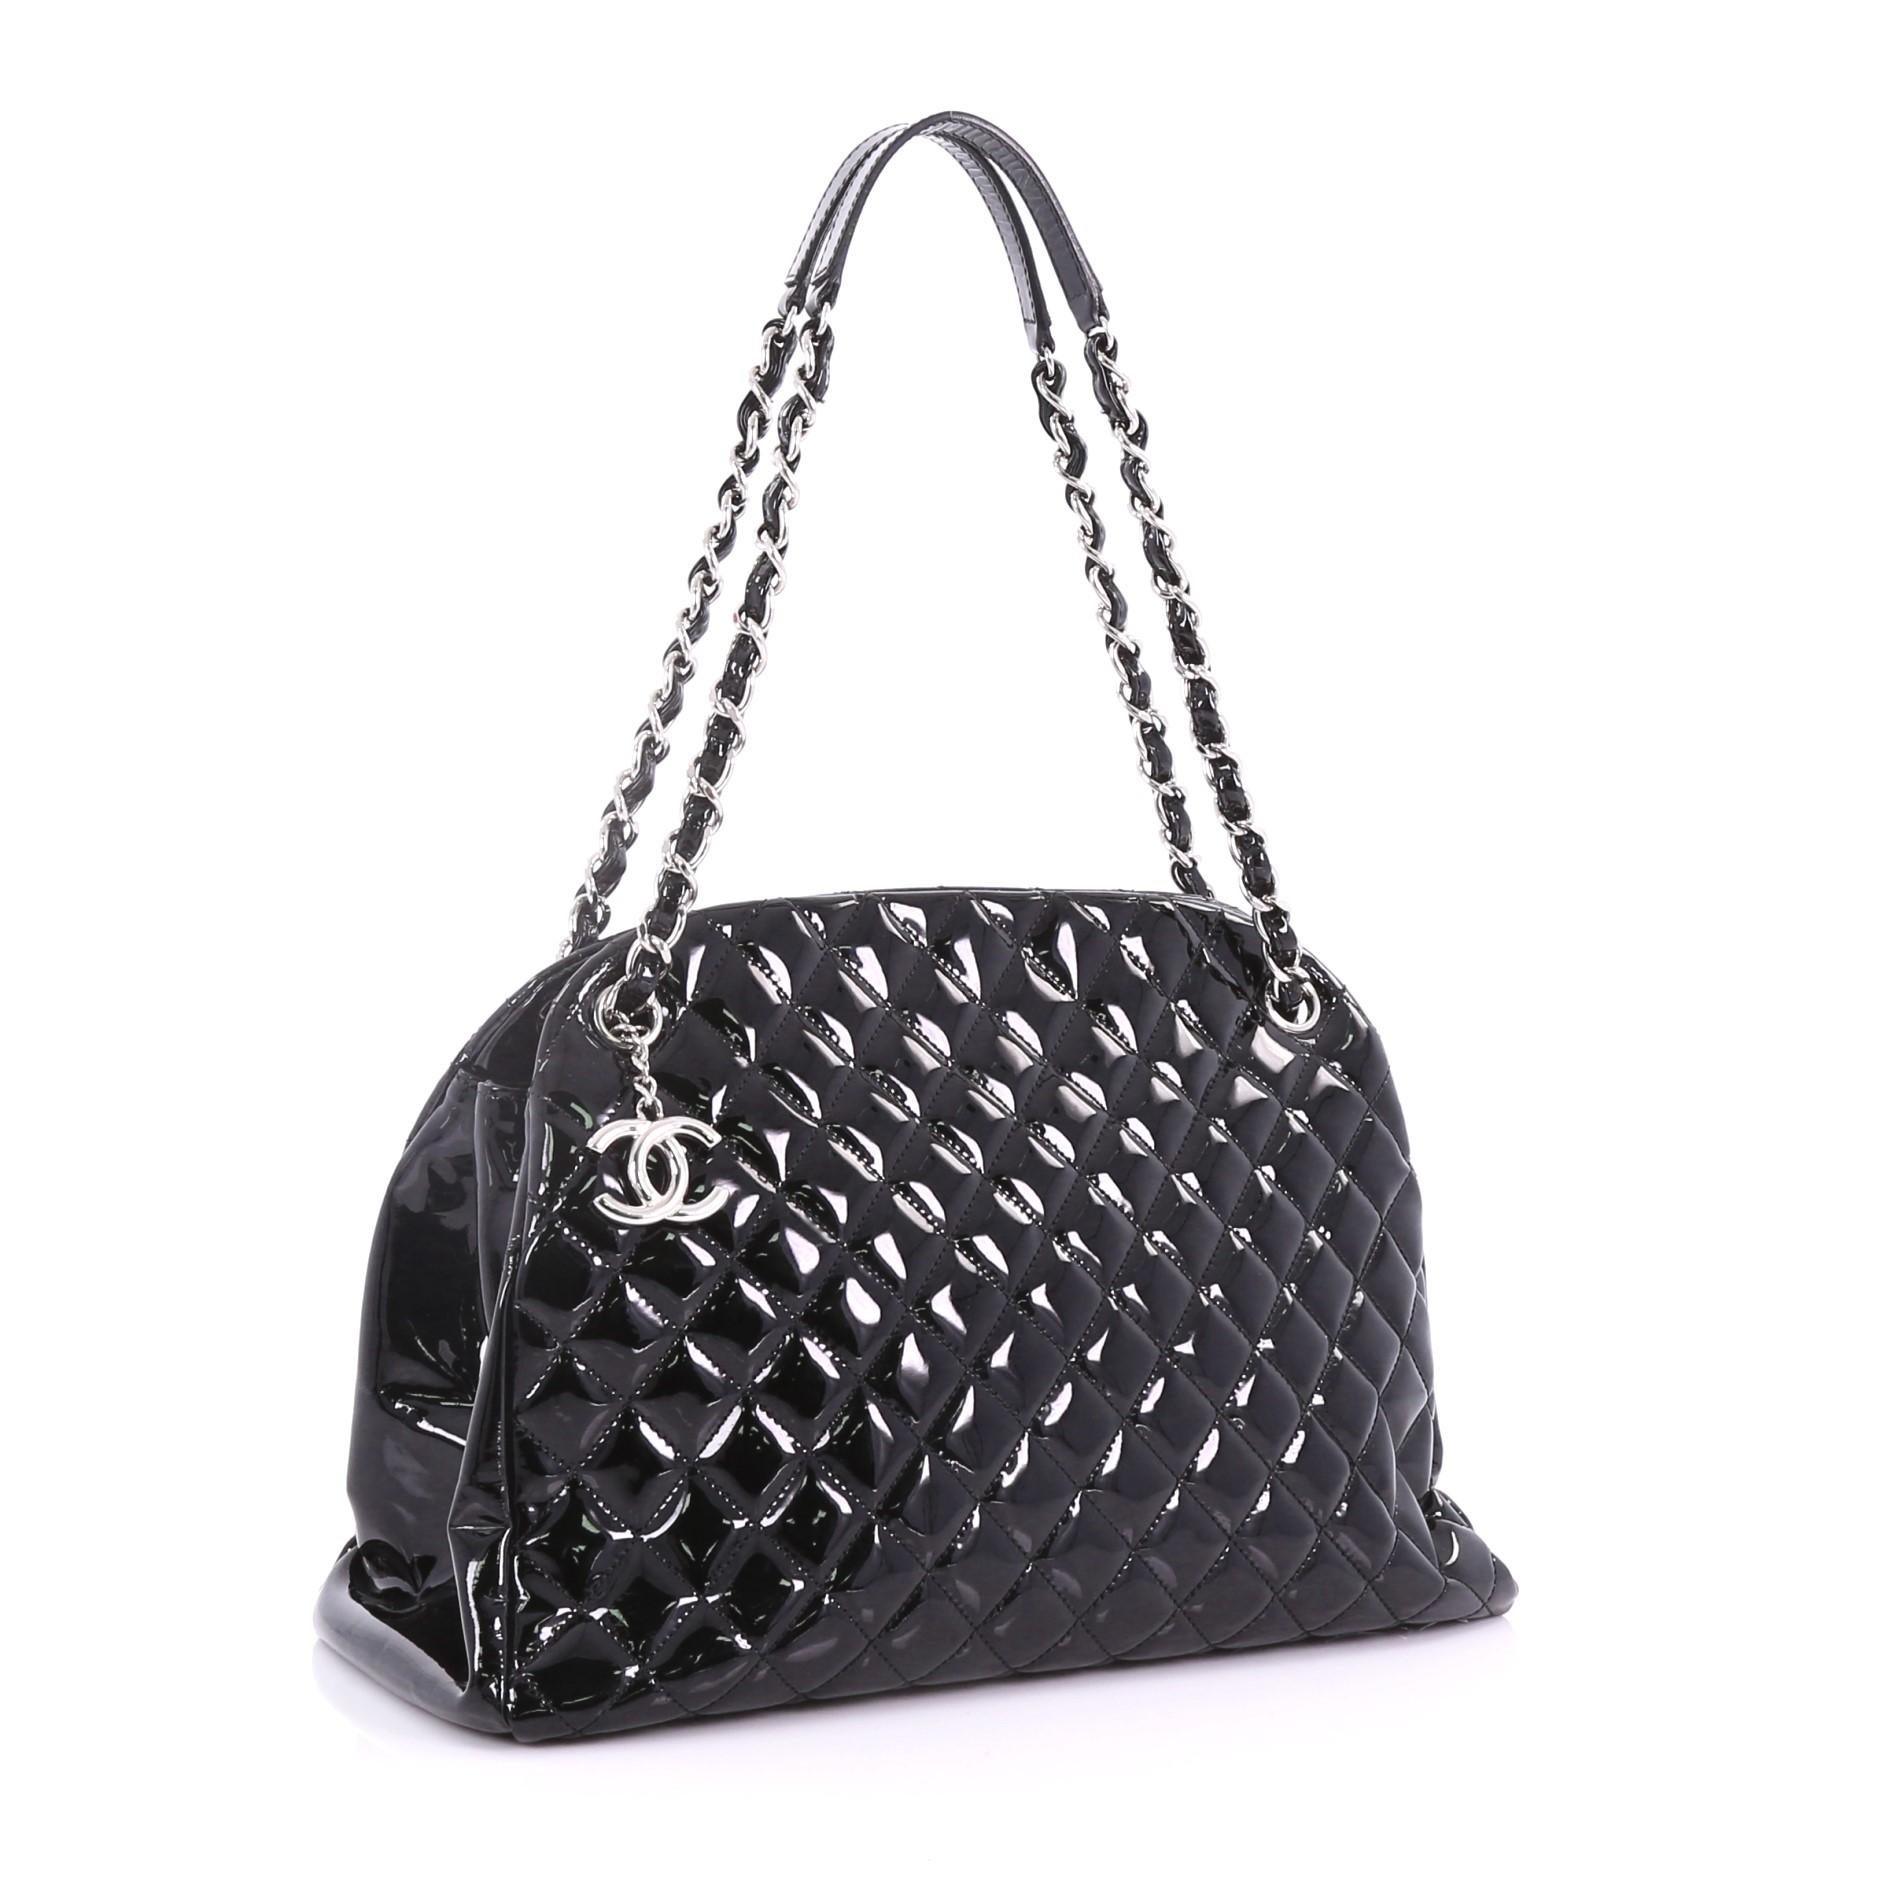 Black Chanel Just Mademoiselle Handbag Quilted Patent Large